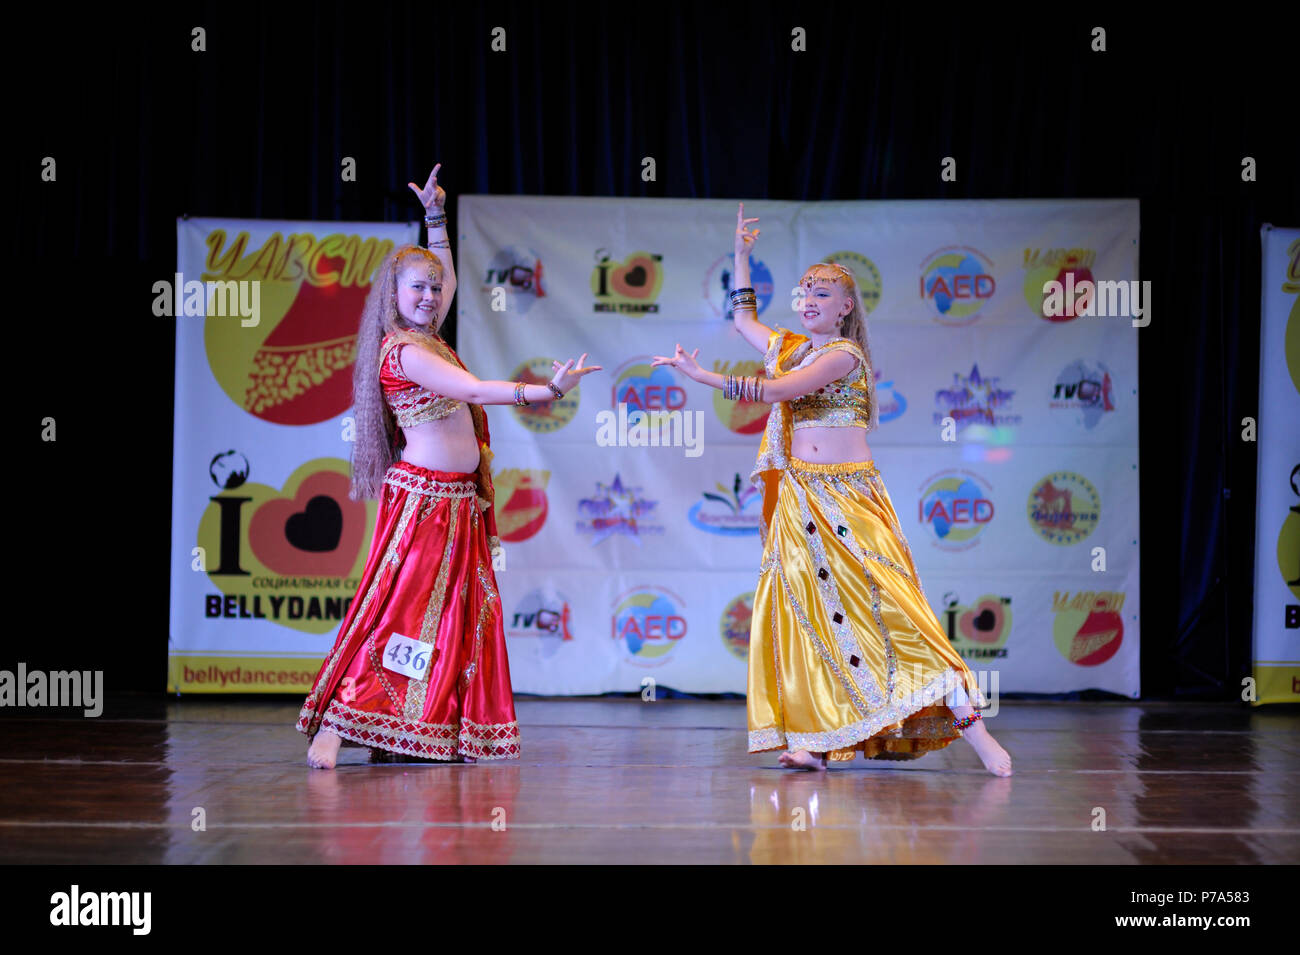 Dancers in a native dresses performing oriental dance on stage. Festival Miss Belly dance 2017. March 7, 2017. Kiev, Ukraine Stock Photo